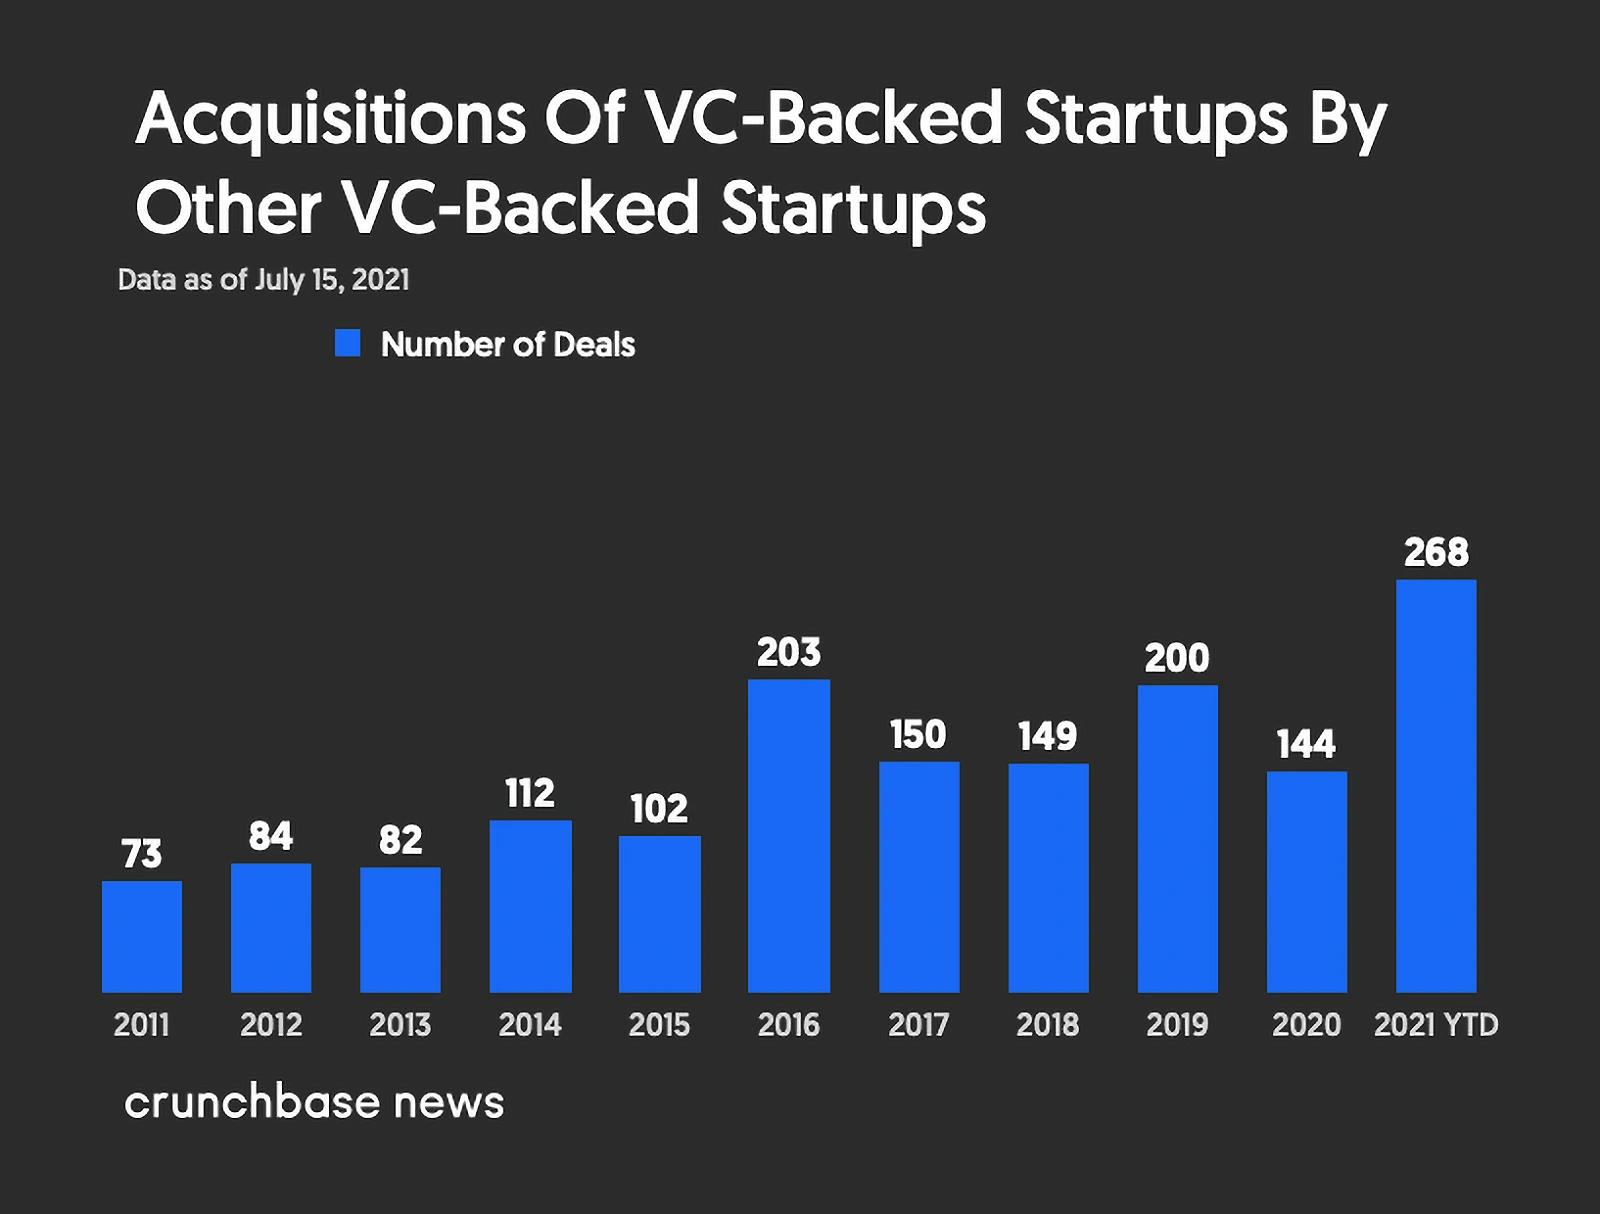 vc-backed-startups-acquisitions-min.png